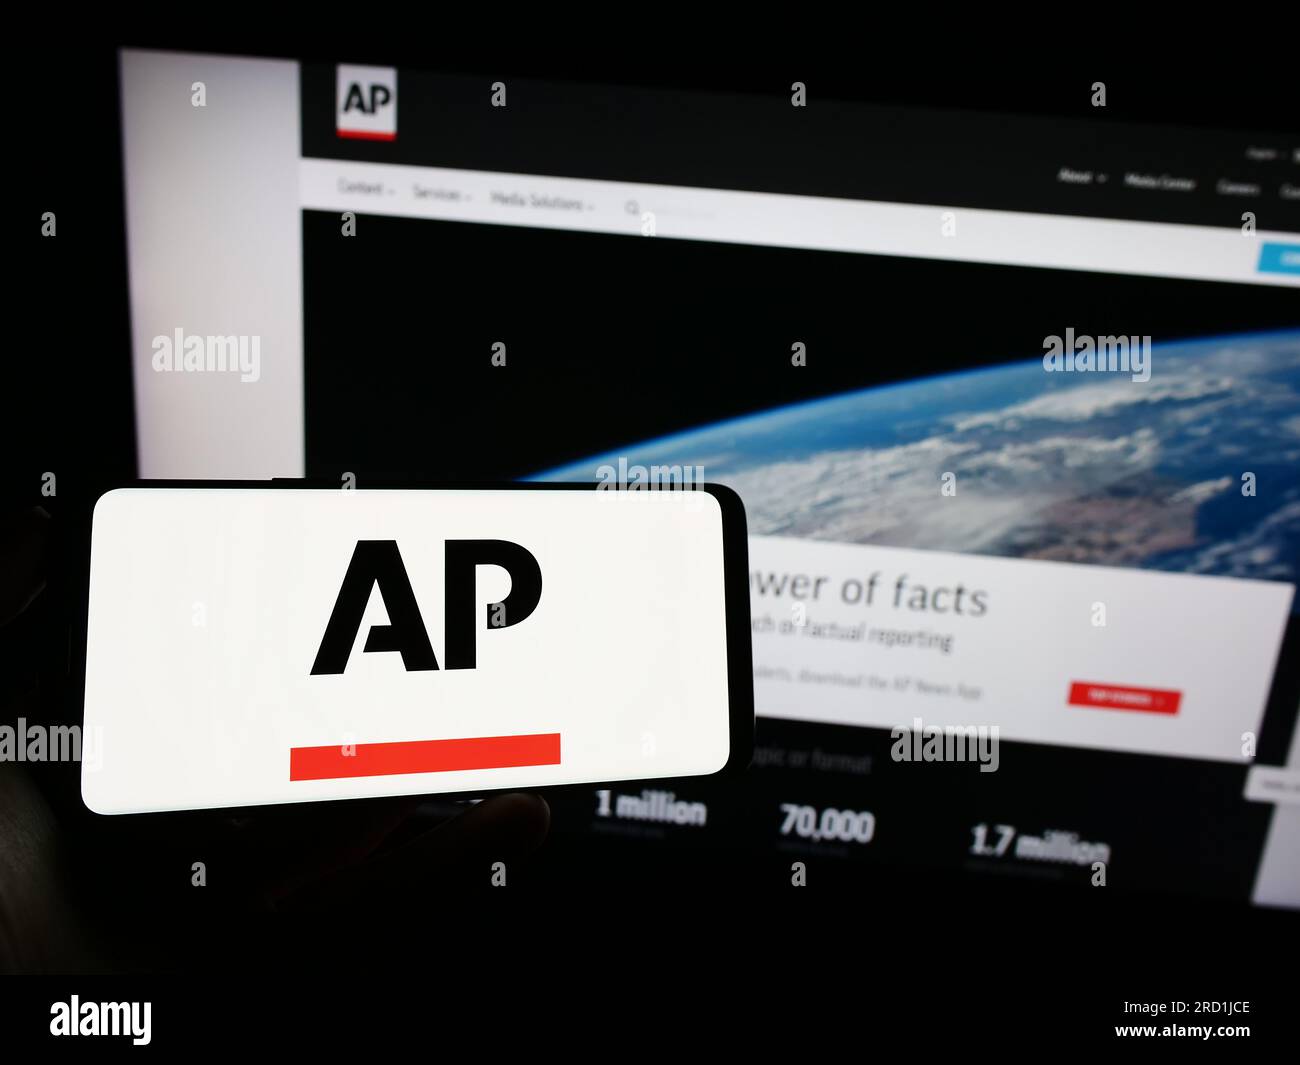 Person holding cellphone with logo of US news agency Associated Press (AP) on screen in front of webpage. Focus on phone display. Stock Photo